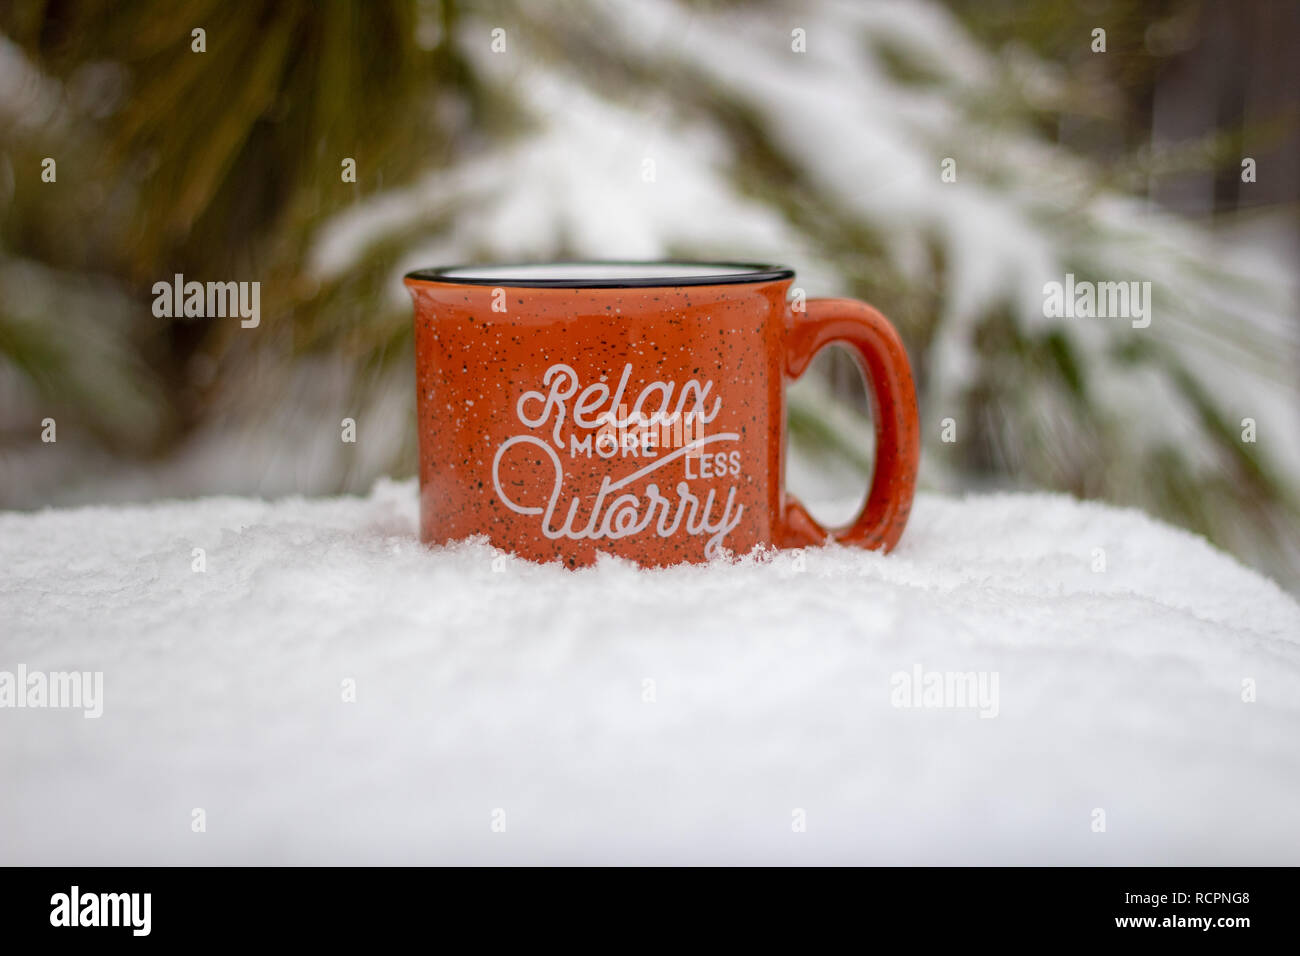 Hot mug with steam rising relax more worry less message surrounded by snowy scene and icy pine branches in winter background, holiday stress keep calm Stock Photo